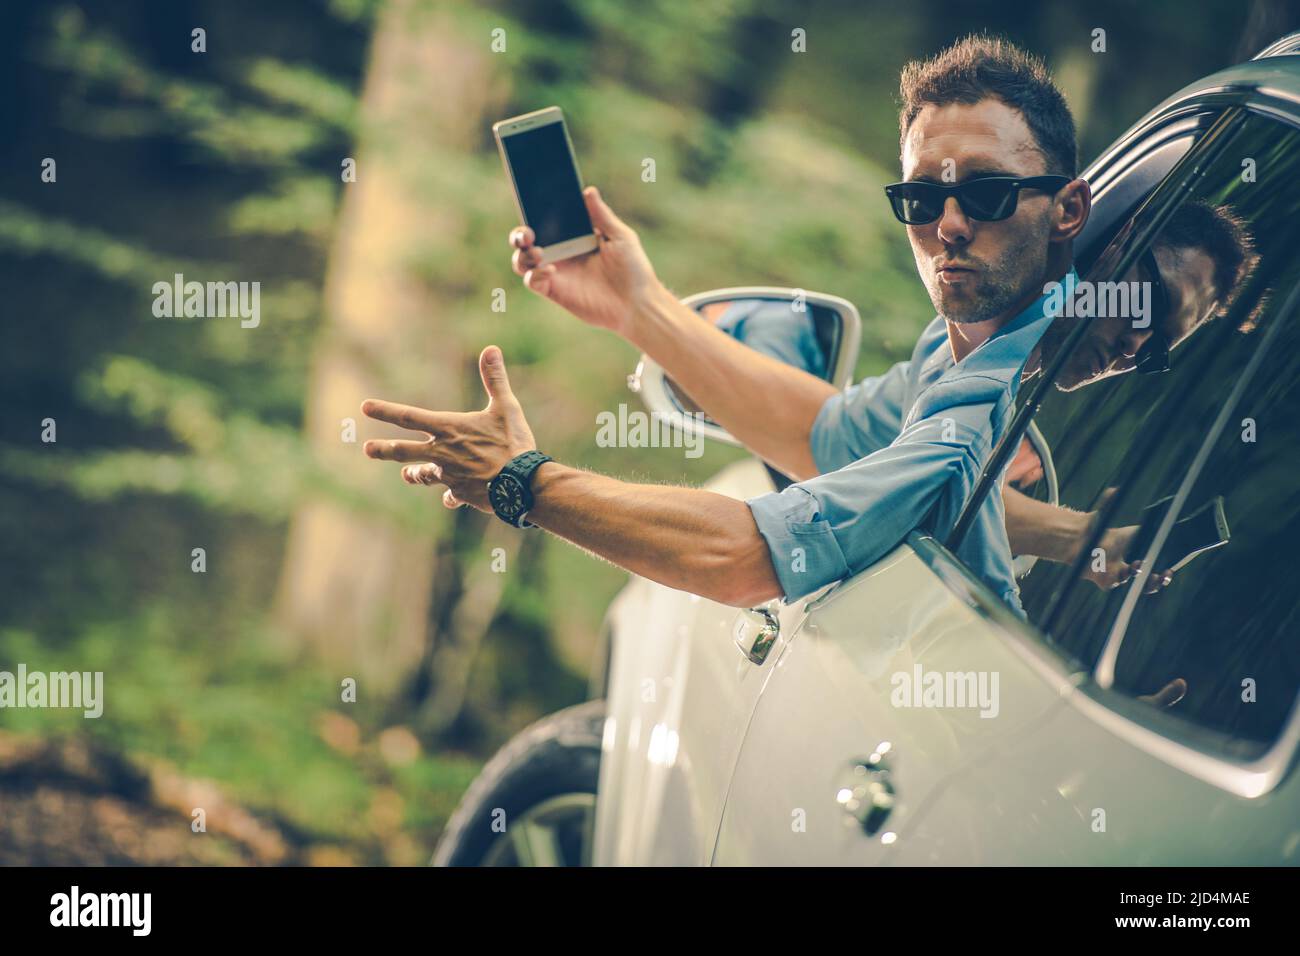 Caucasian Male Driver at His 40s with Phone in a Hand Nervously Looking Backwards Out of His Car Window and Expressing Emotions with Gestures. Stock Photo